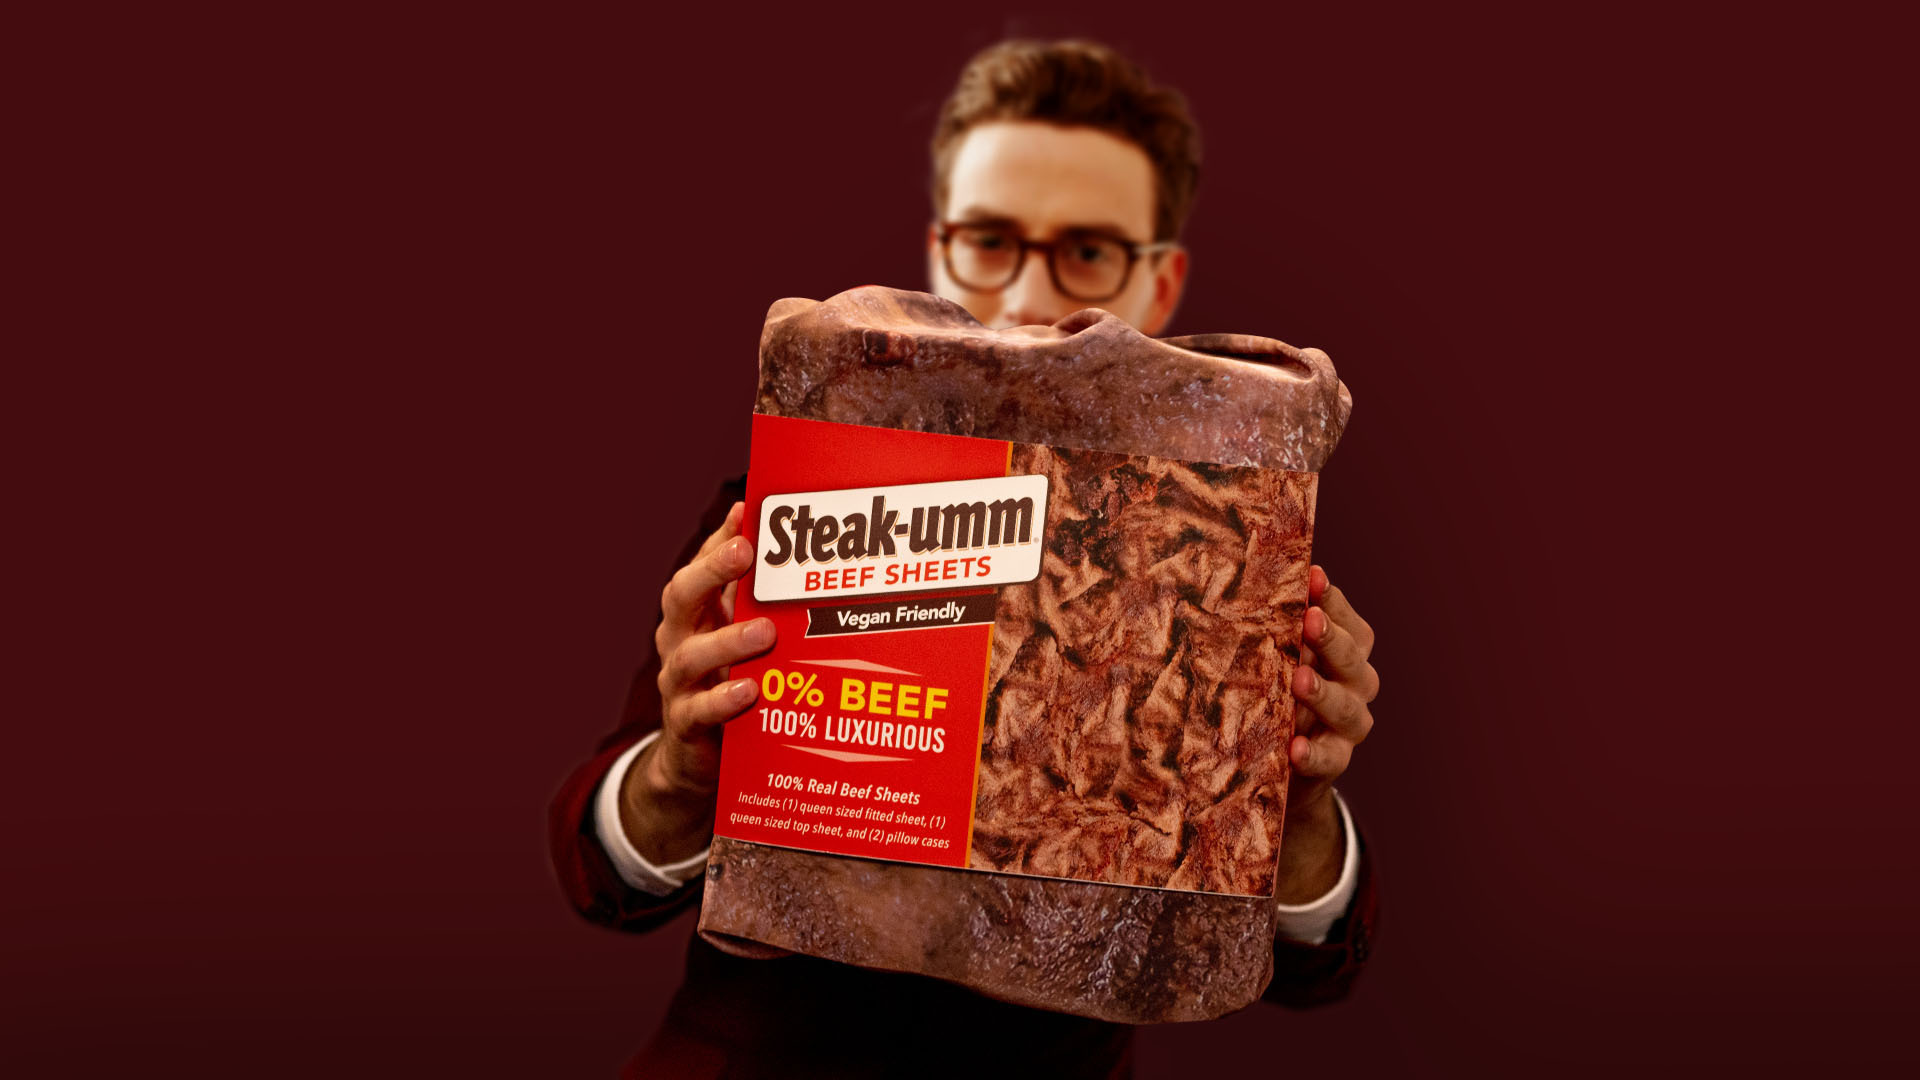 Beef-curious doctor holding the beef sheets